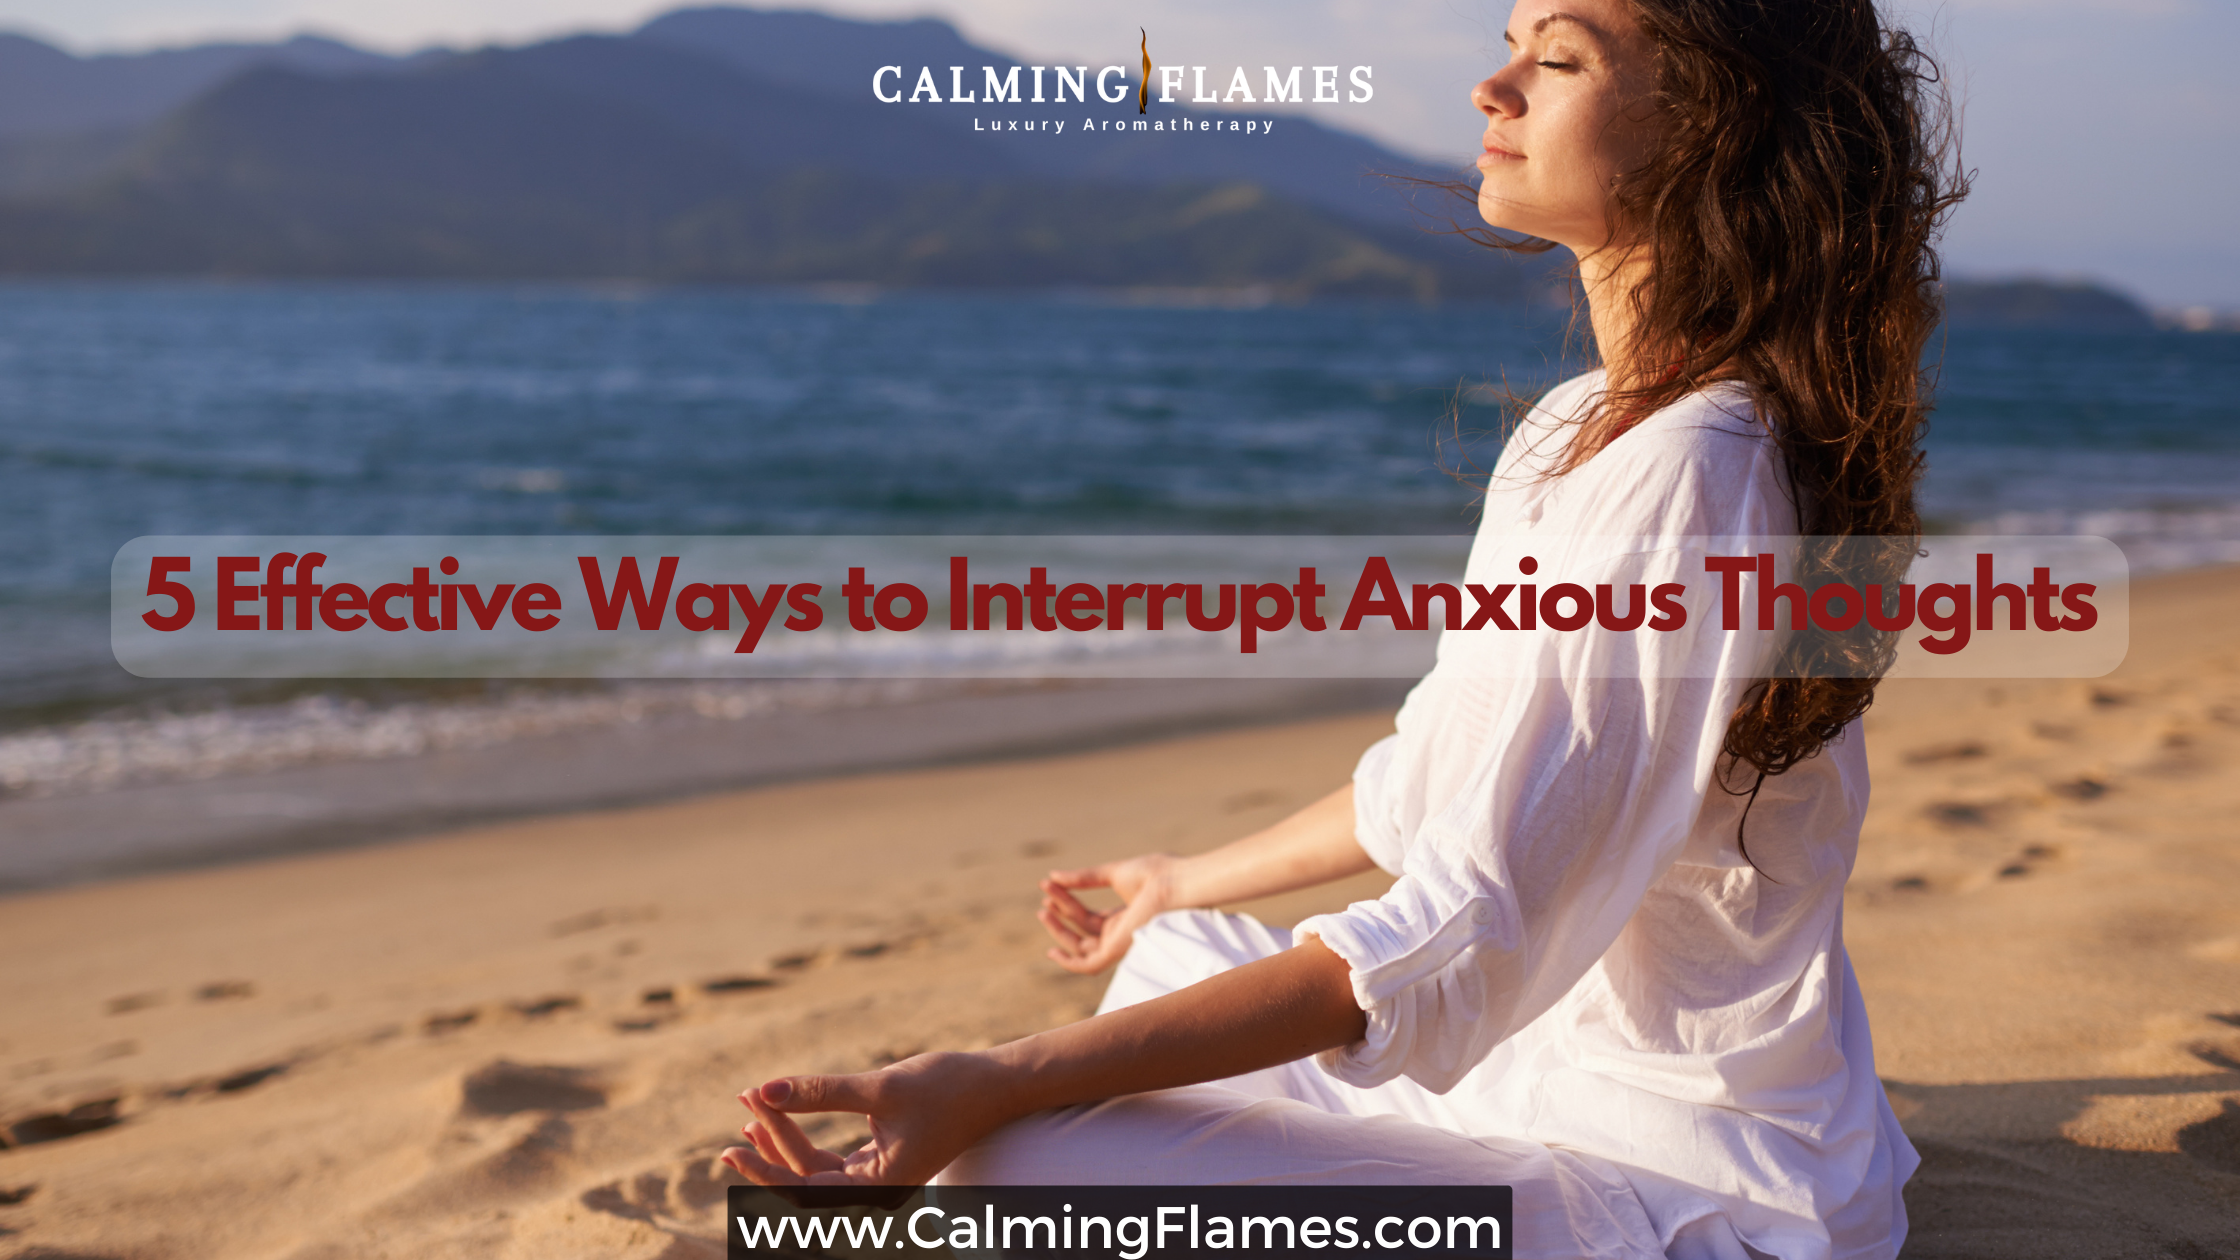 5 Effective Ways to Interrupt Anxious Thoughts and Find Peace and Calm